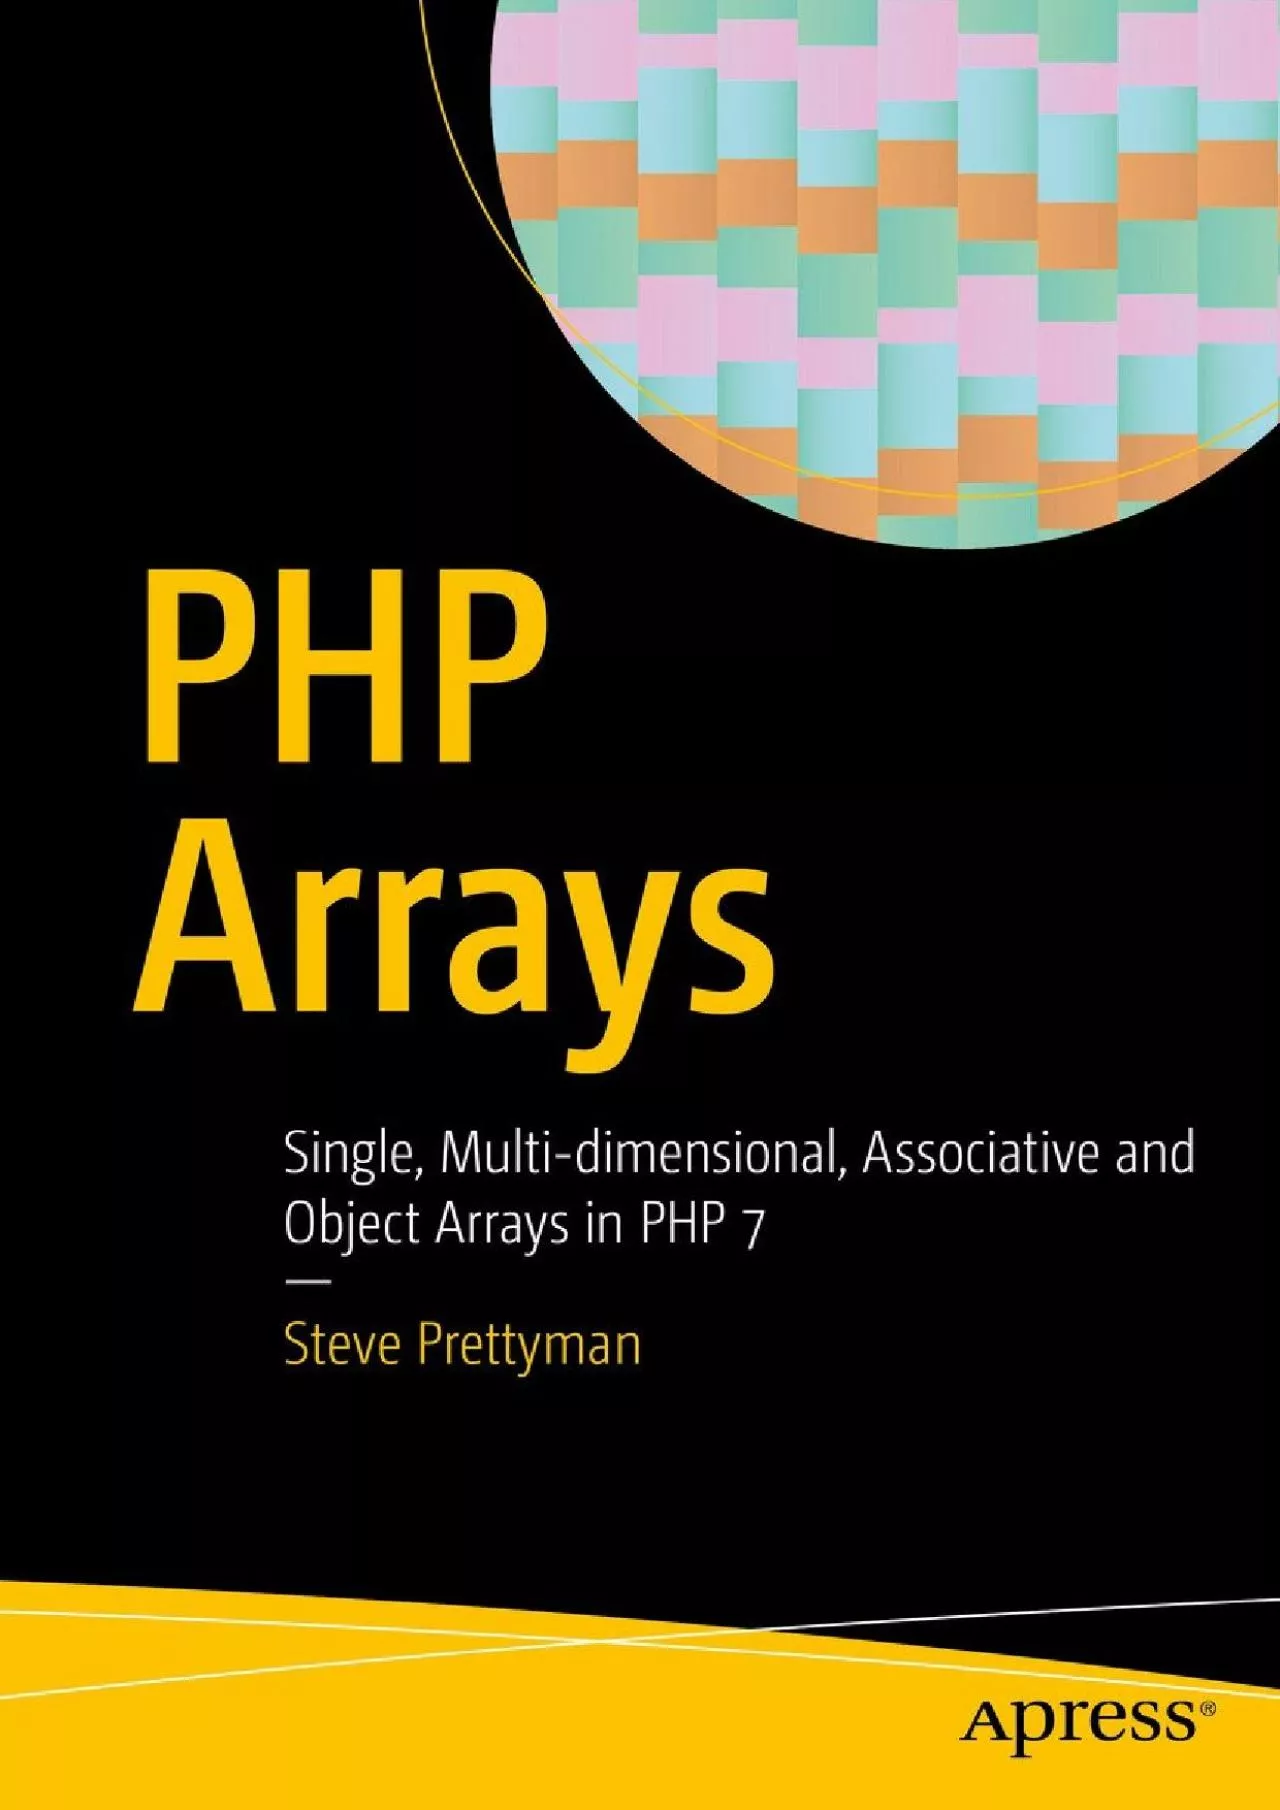 [READING BOOK]-PHP Arrays: Single, Multi-dimensional, Associative and Object Arrays in